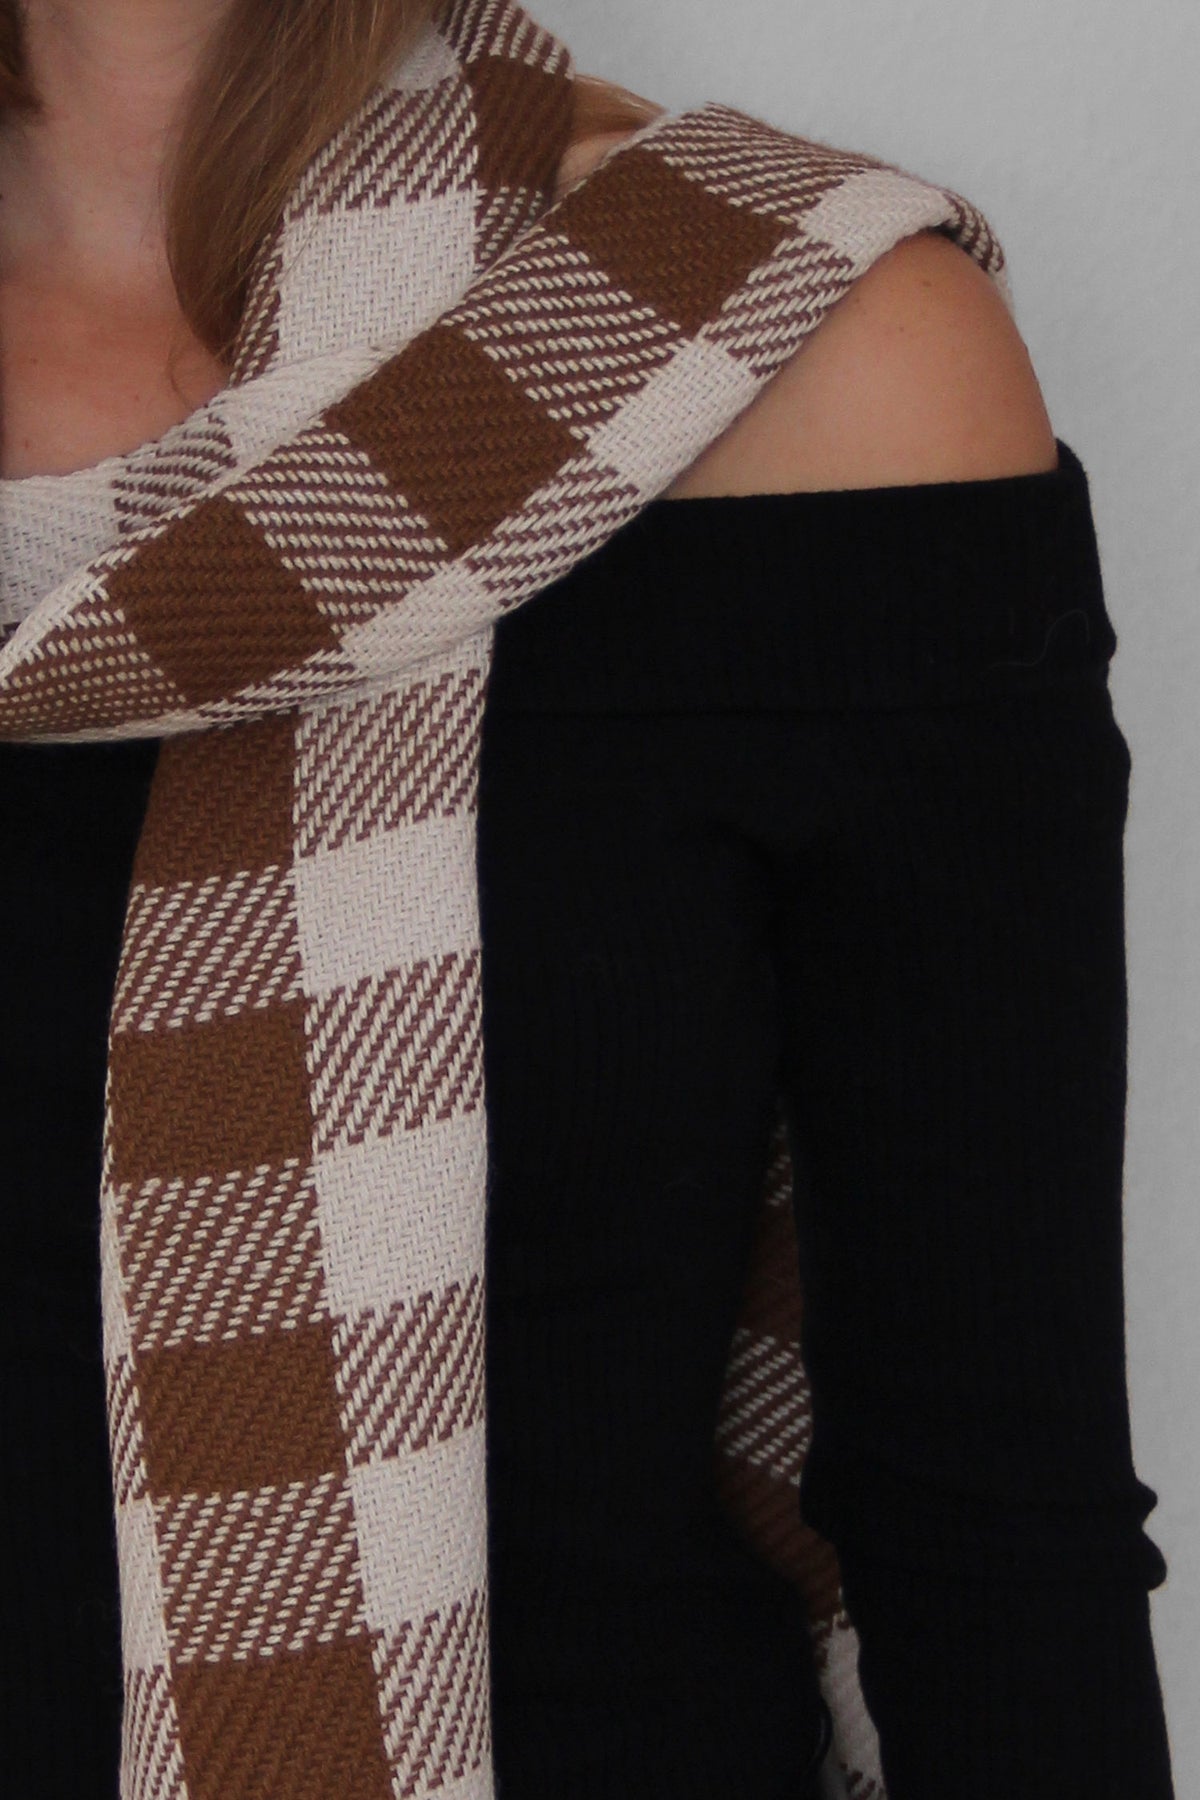 An Alpaca scarf with a Checkered pattern